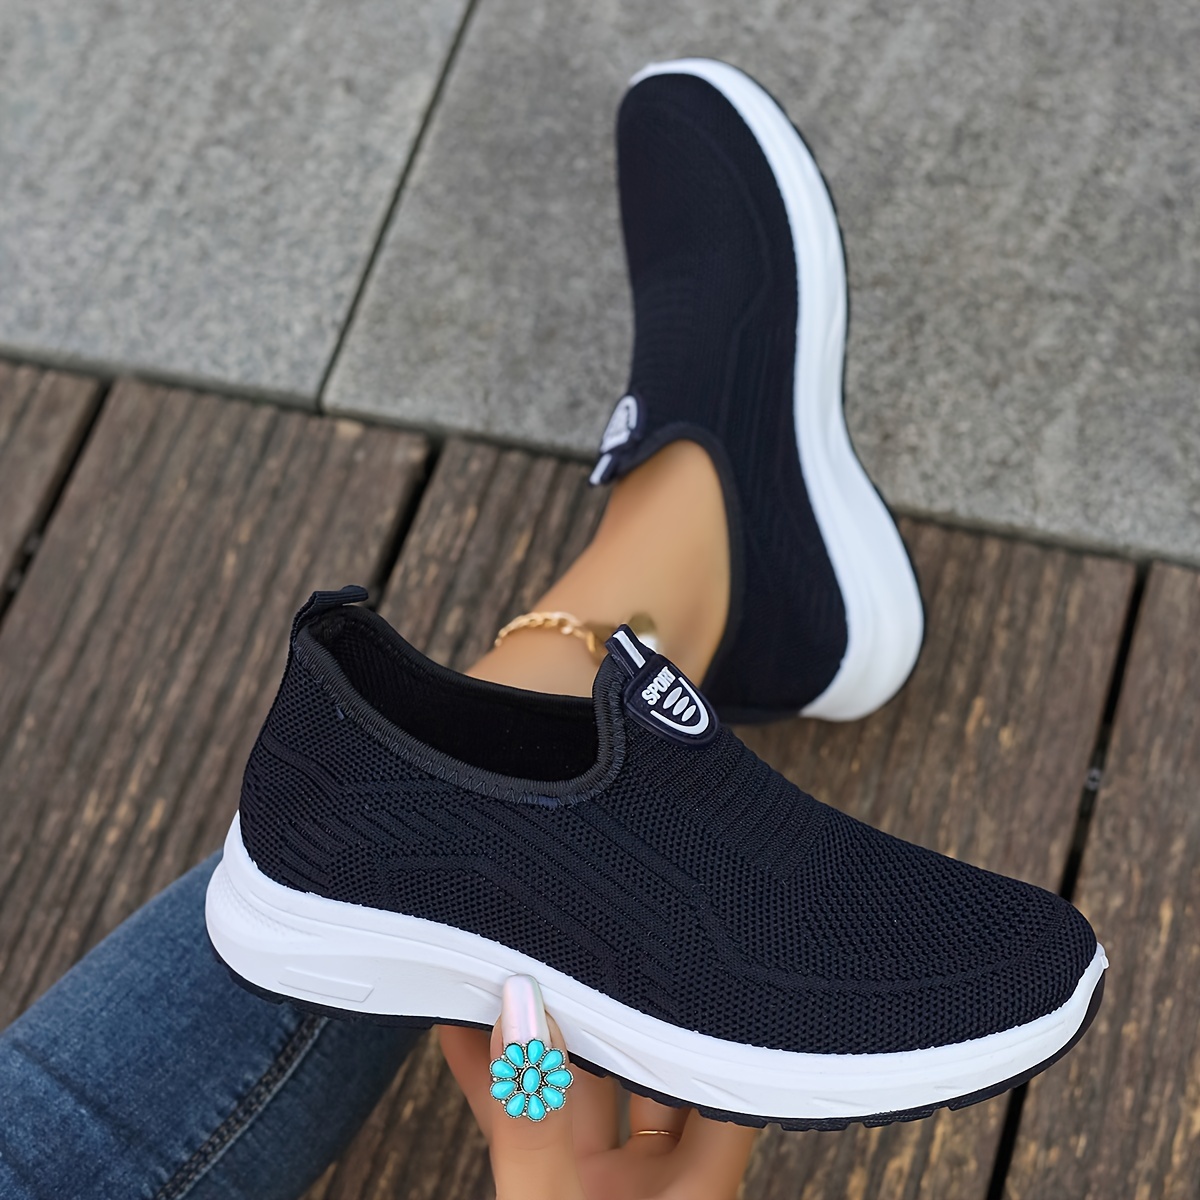 

Women's Breathable Flying Woven Sneakers, Casual Slip On Outdoor Shoes, Comfortable Low Top Sport Shoes